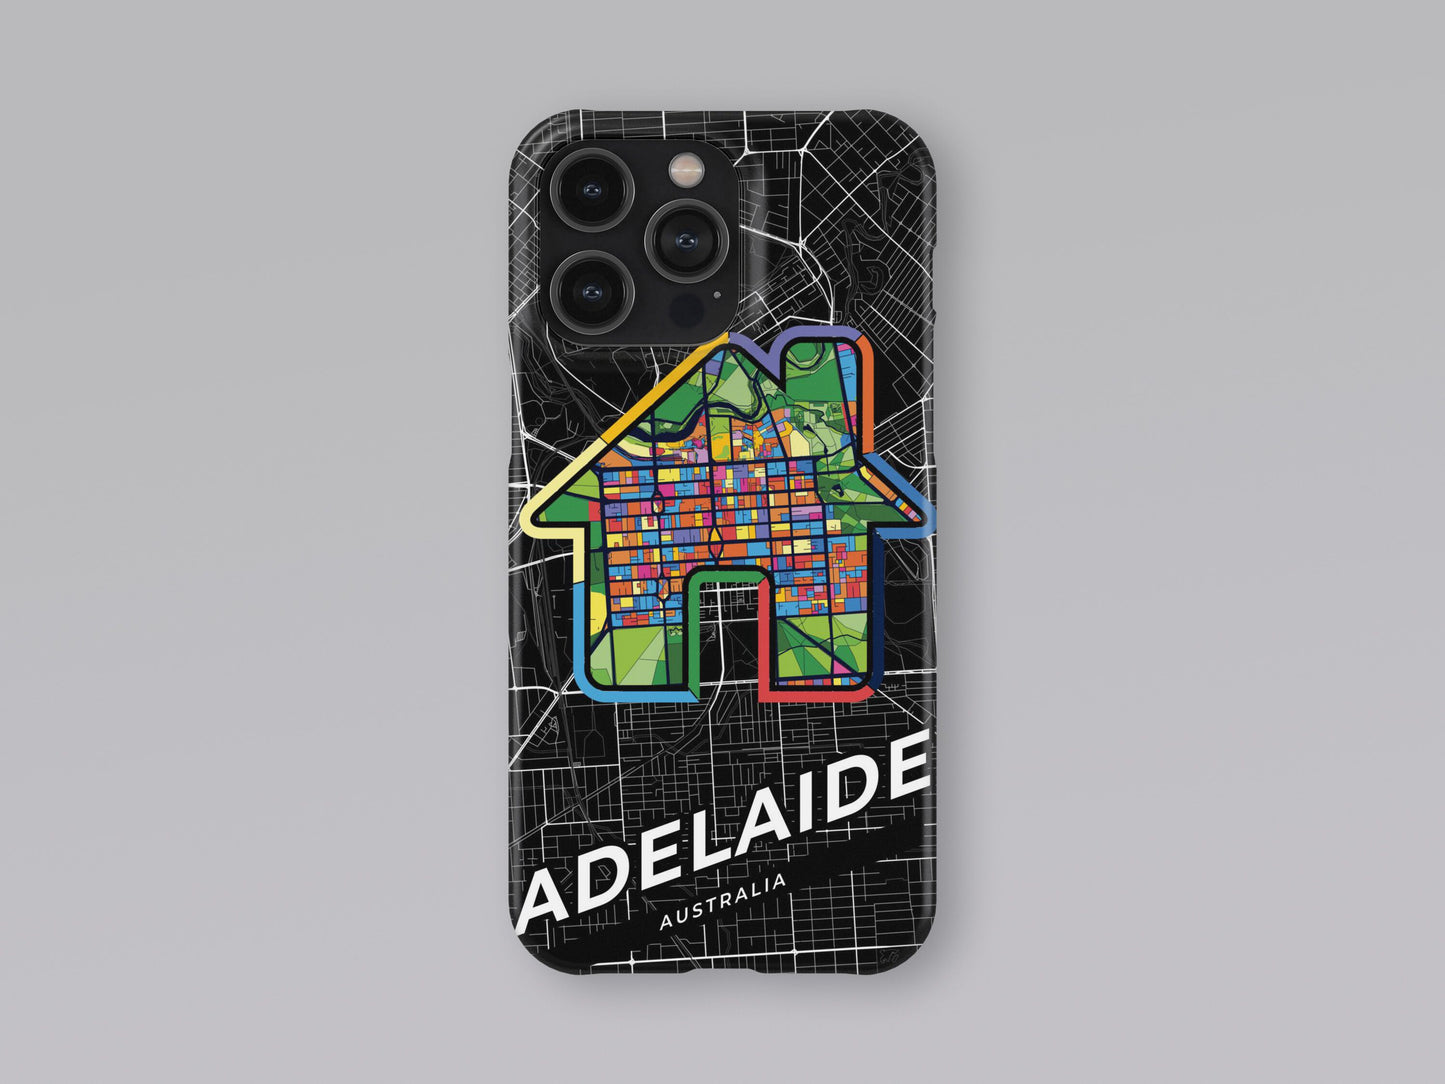 Adelaide Australia slim phone case with colorful icon. Birthday, wedding or housewarming gift. Couple match cases. 3